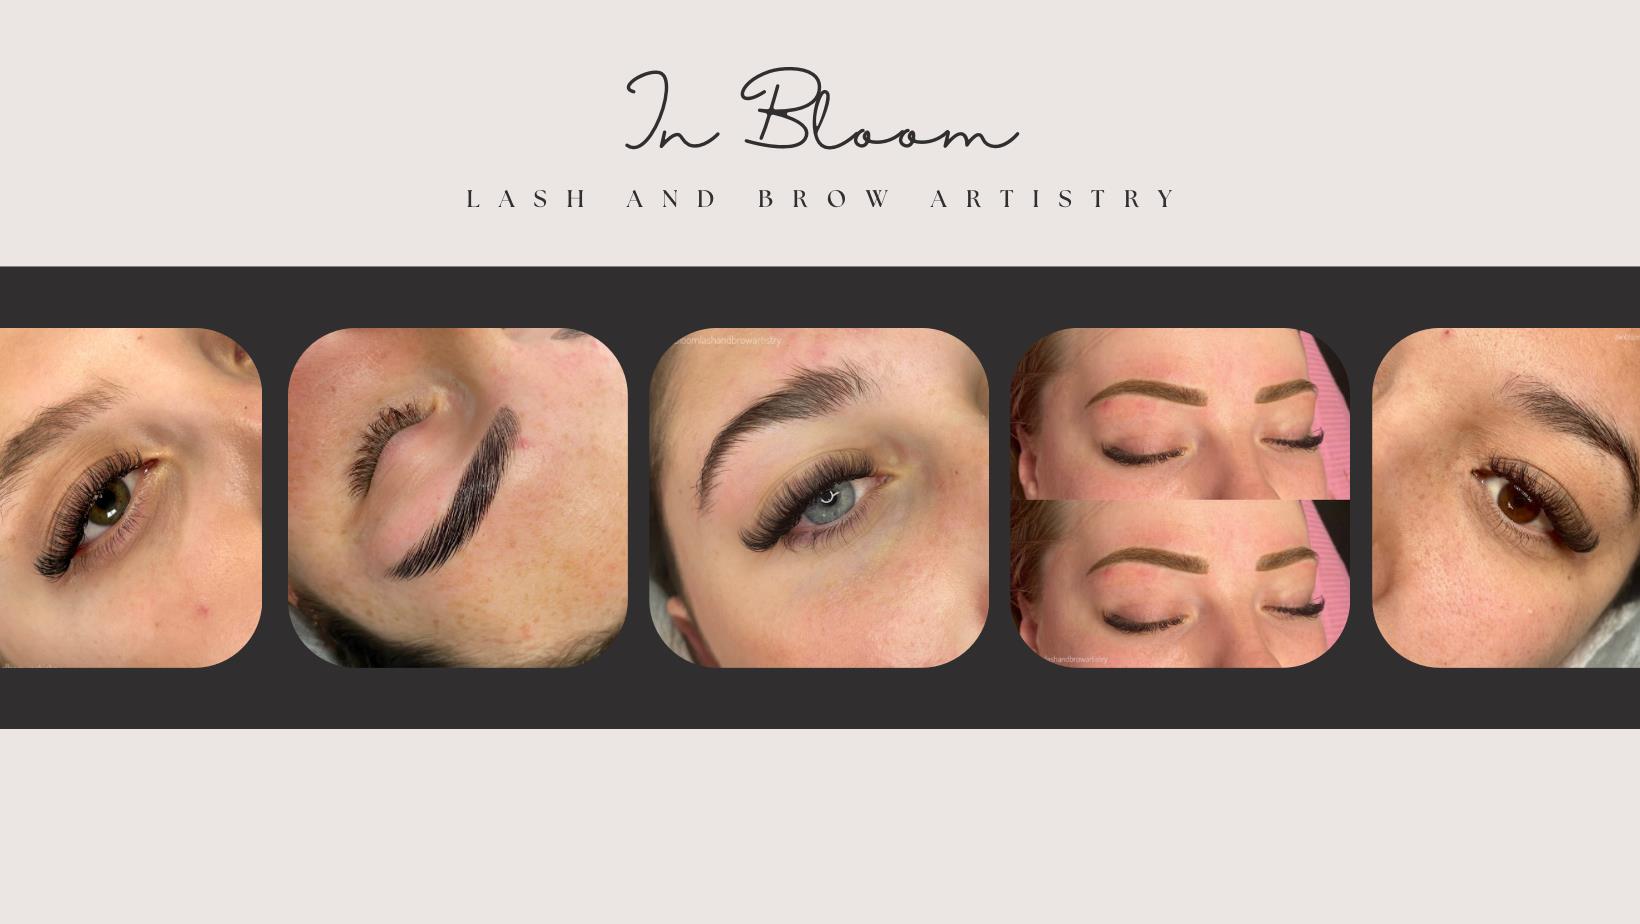 In Bloom Lash And Brow Artistry